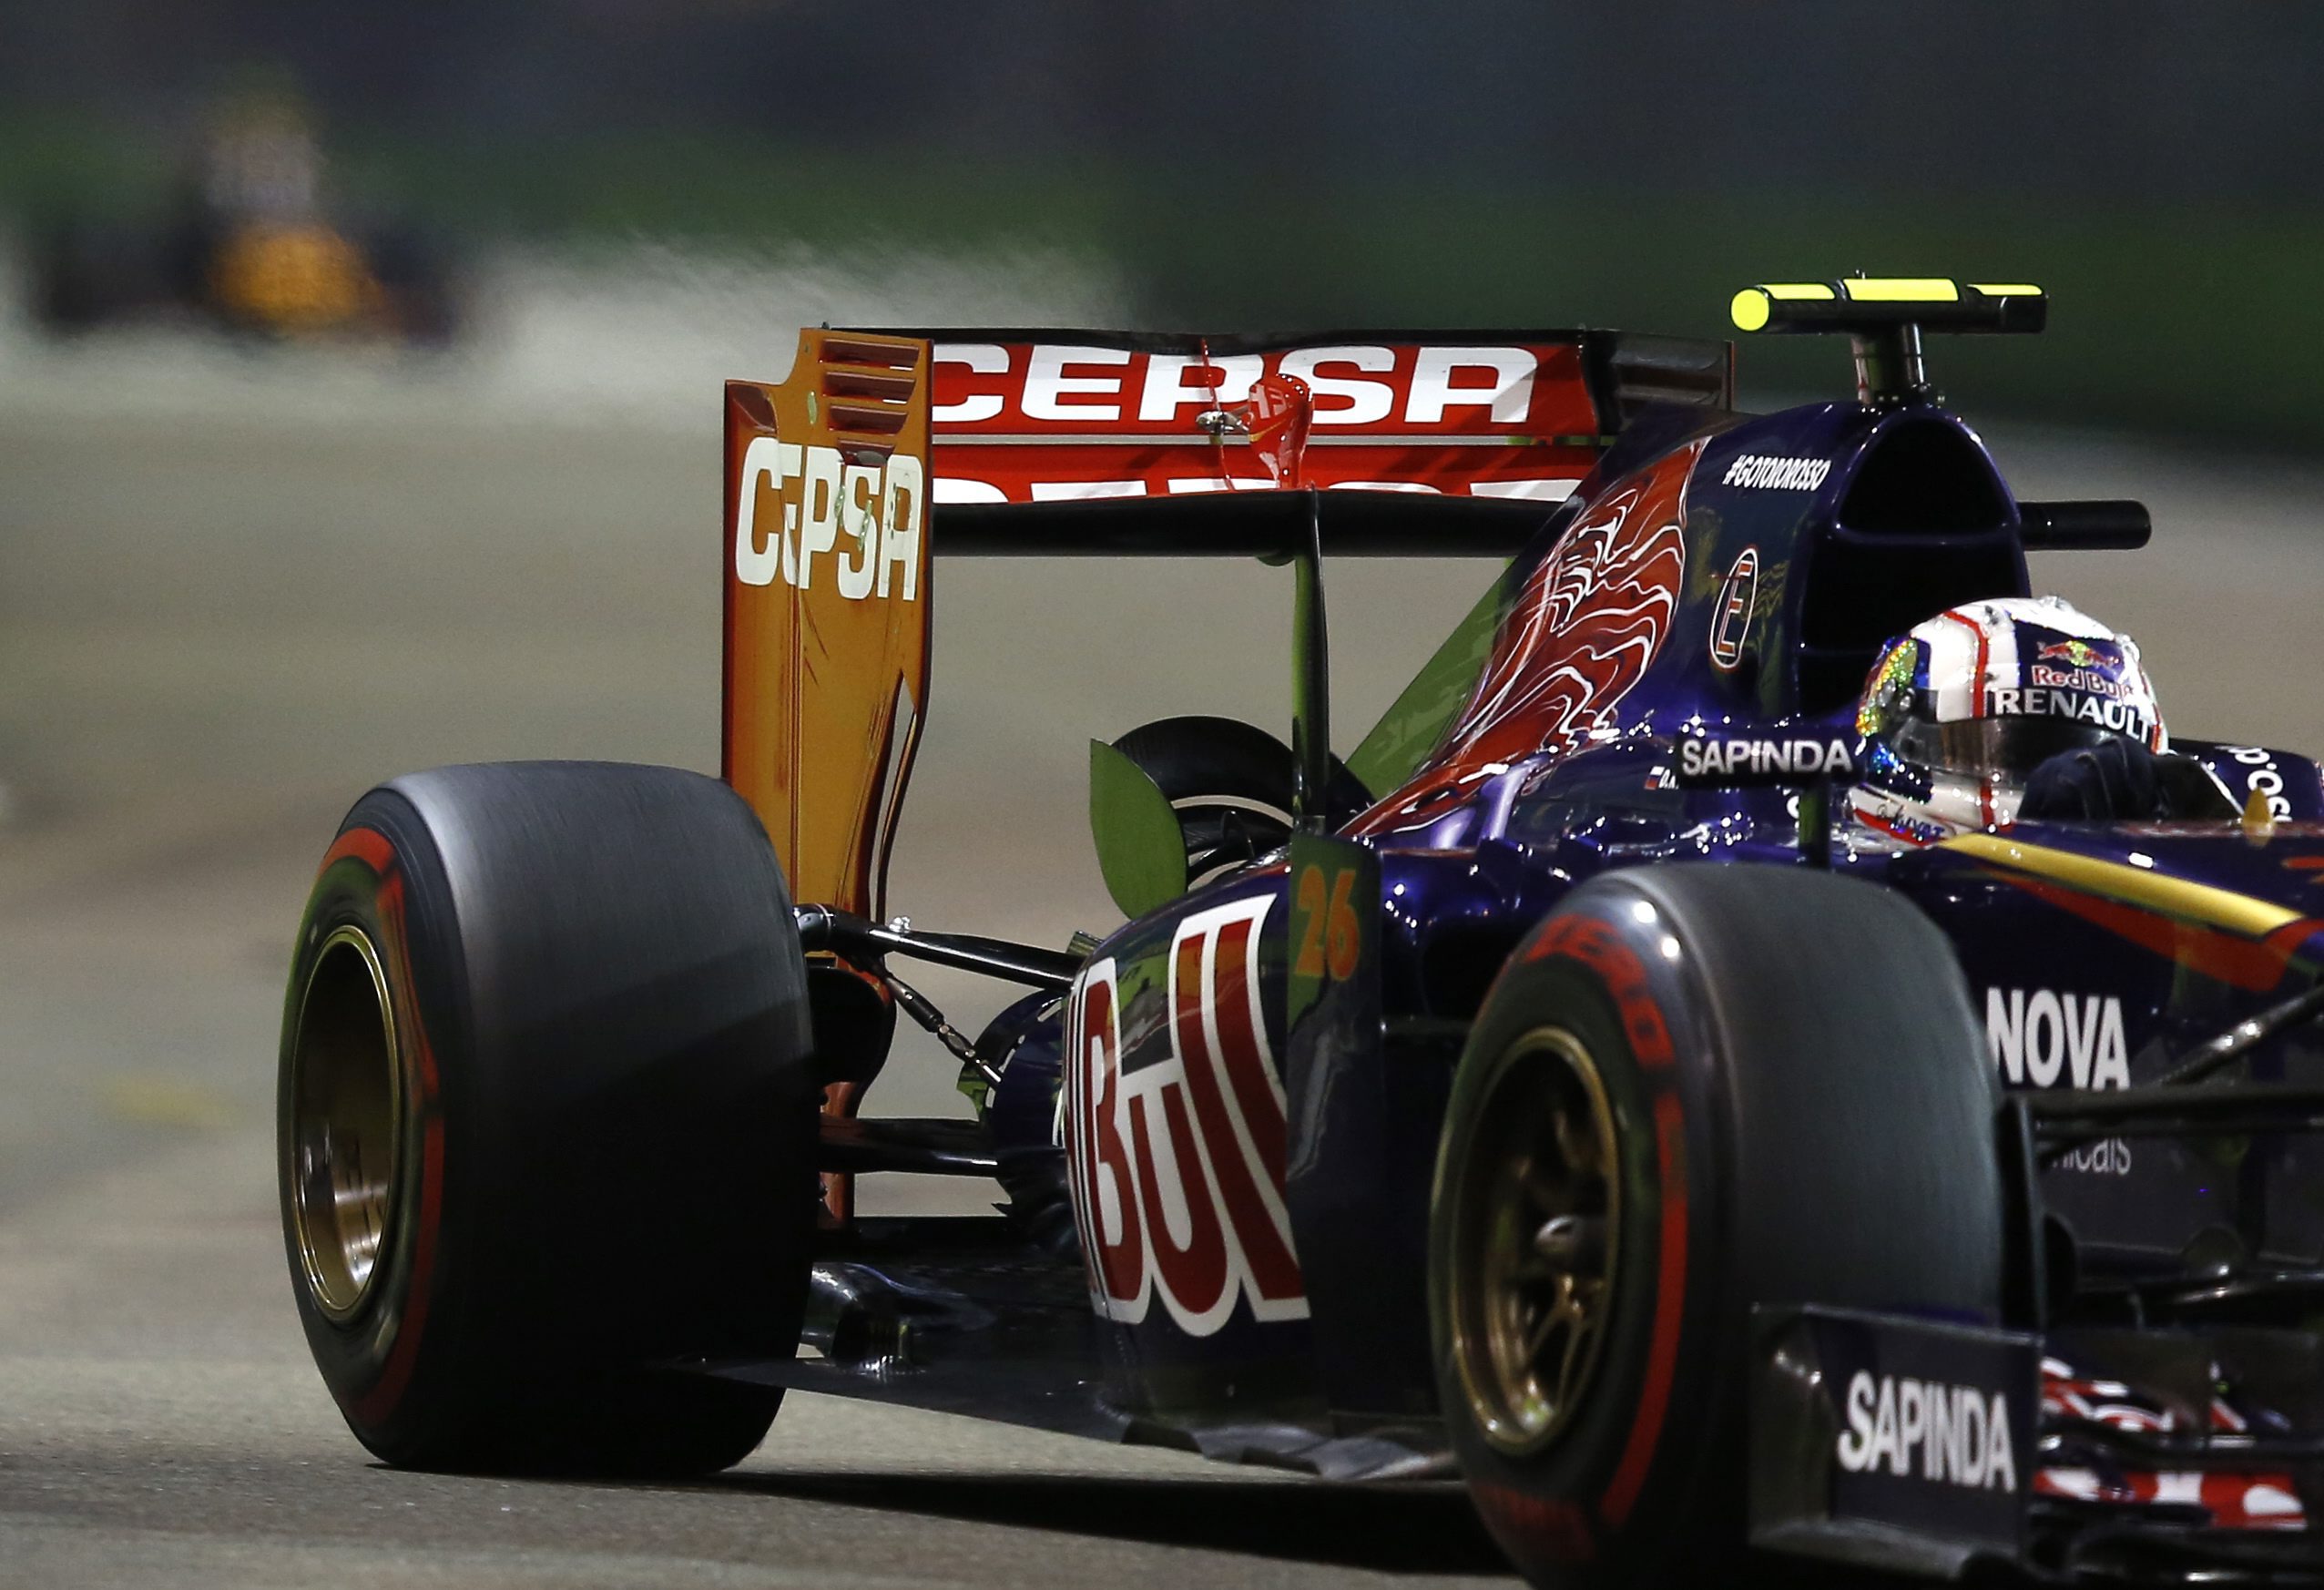 Russian F1 driver Daniil Kyvat of the Toro Rosso team steers his car in a practice session on the street circuit of the Singapore Grand Prix. Photo: EPA